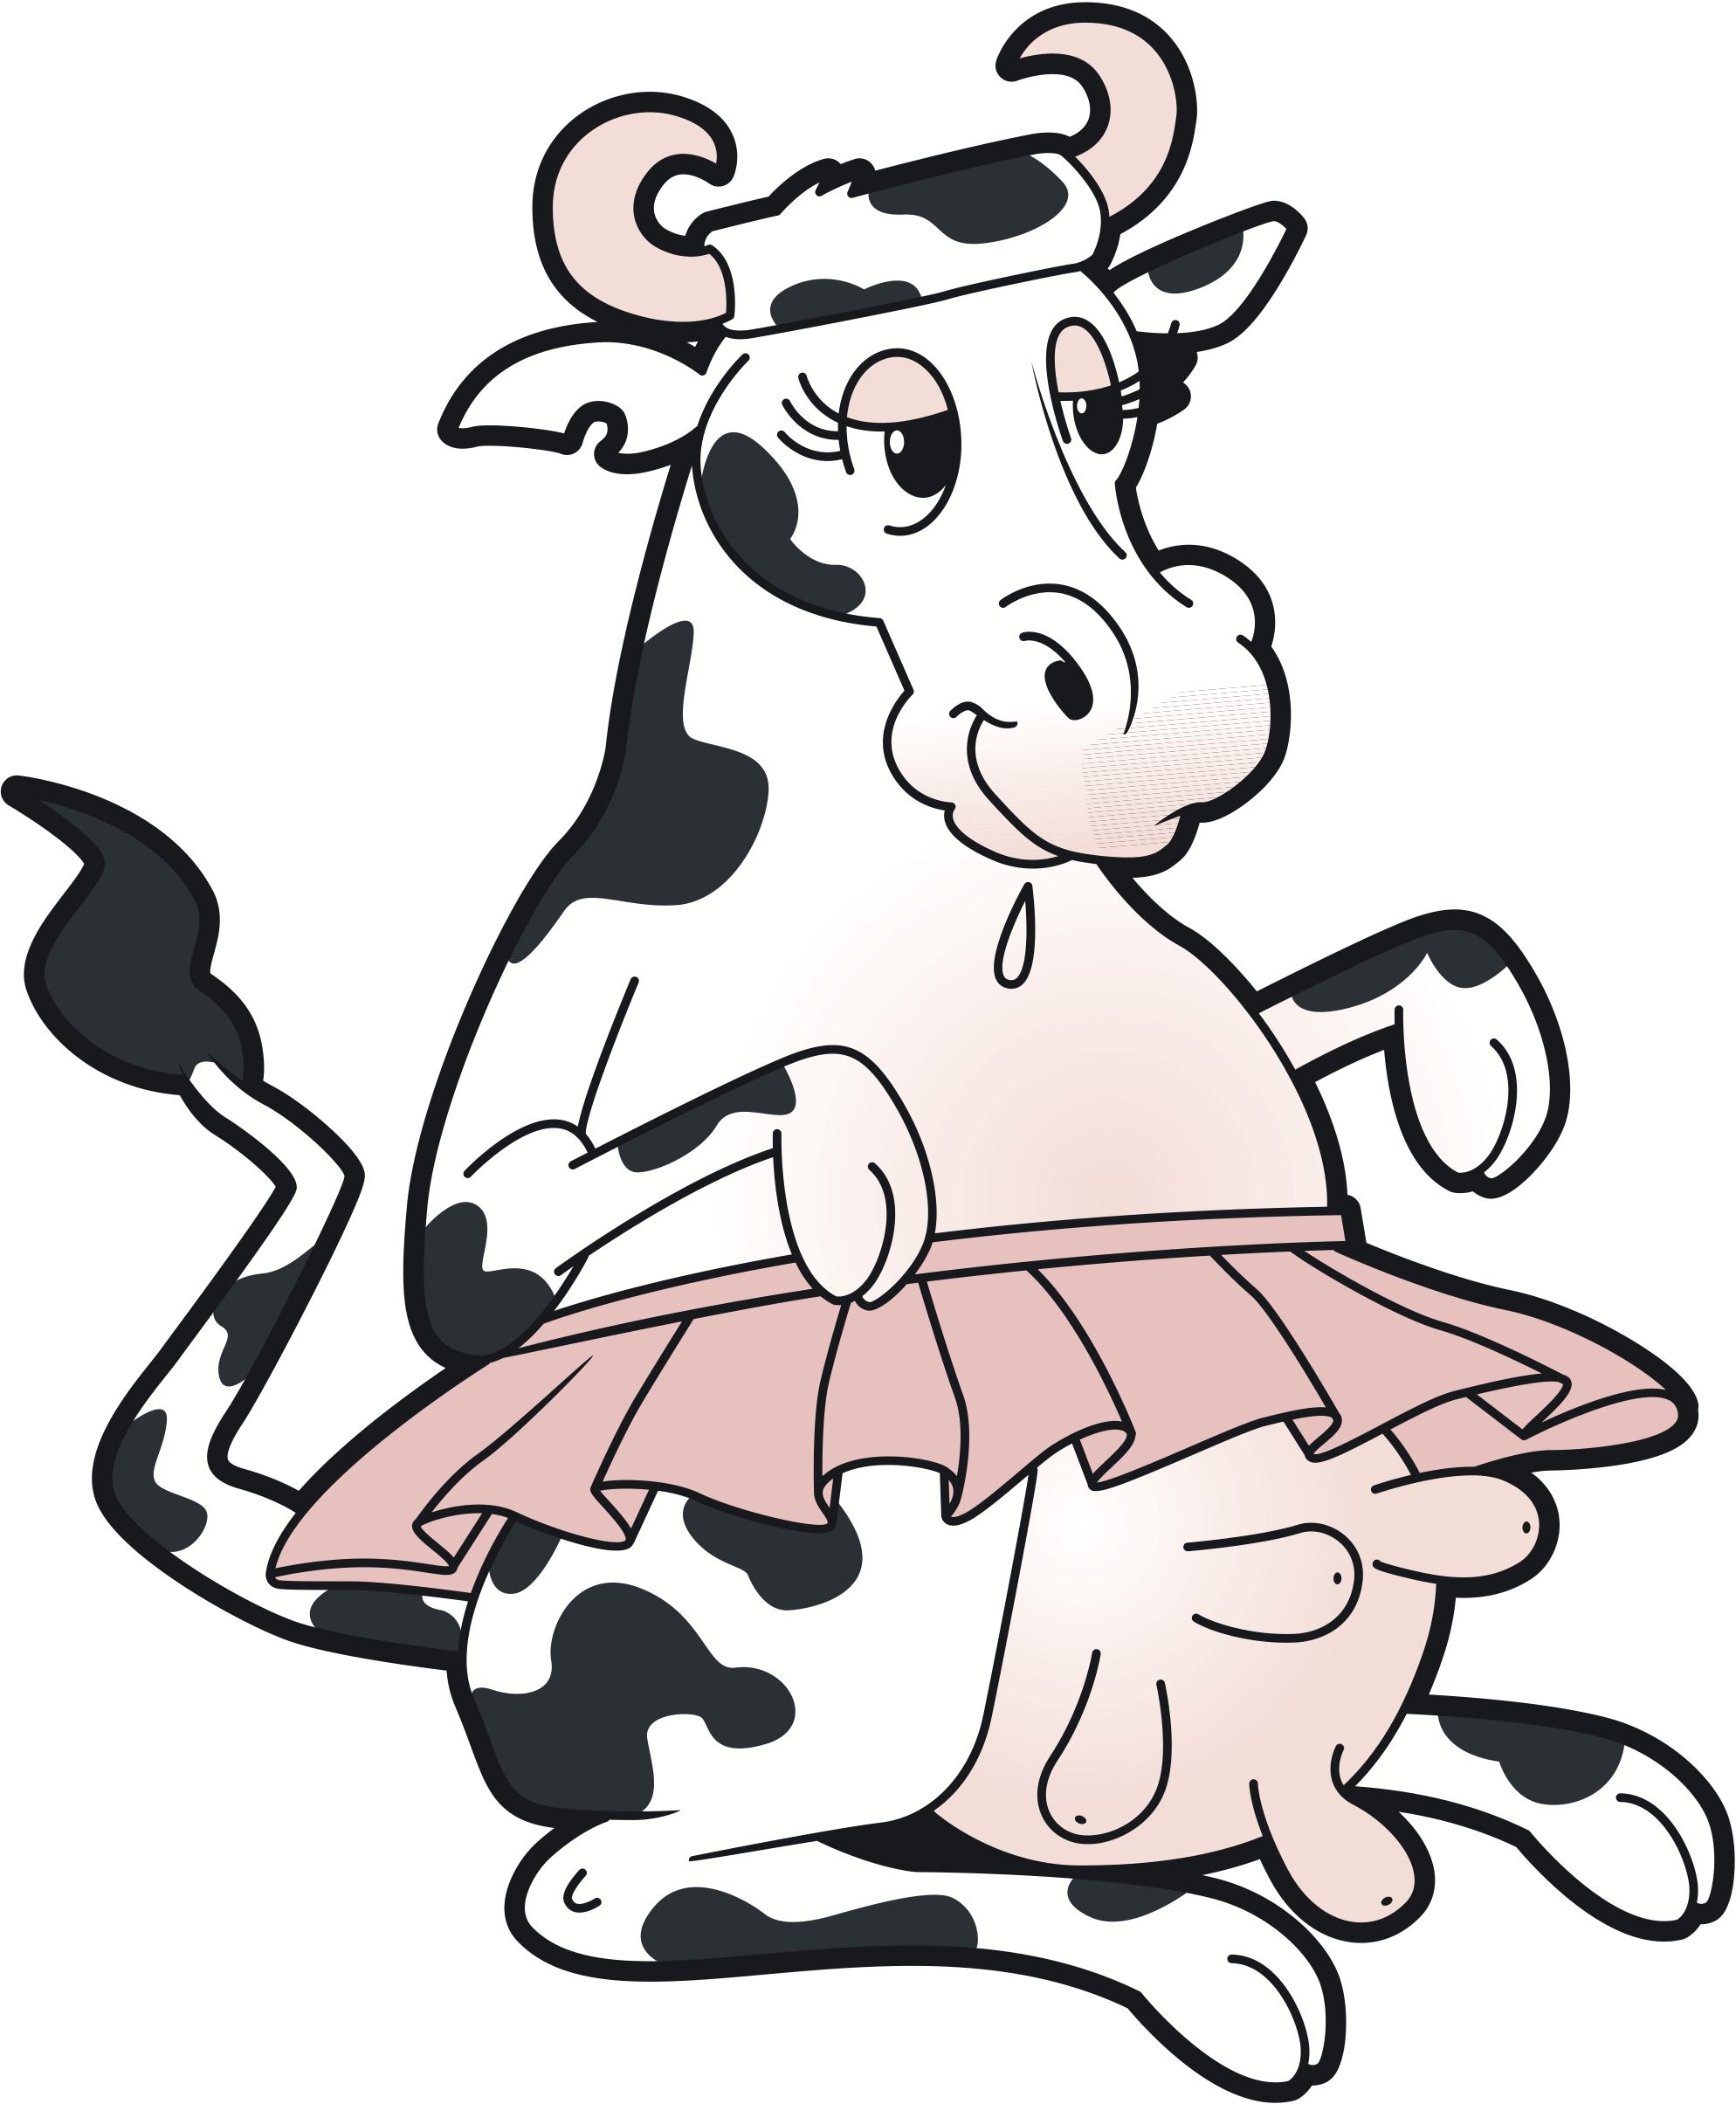 Cartoon Pictures Of Cows - Clipart library